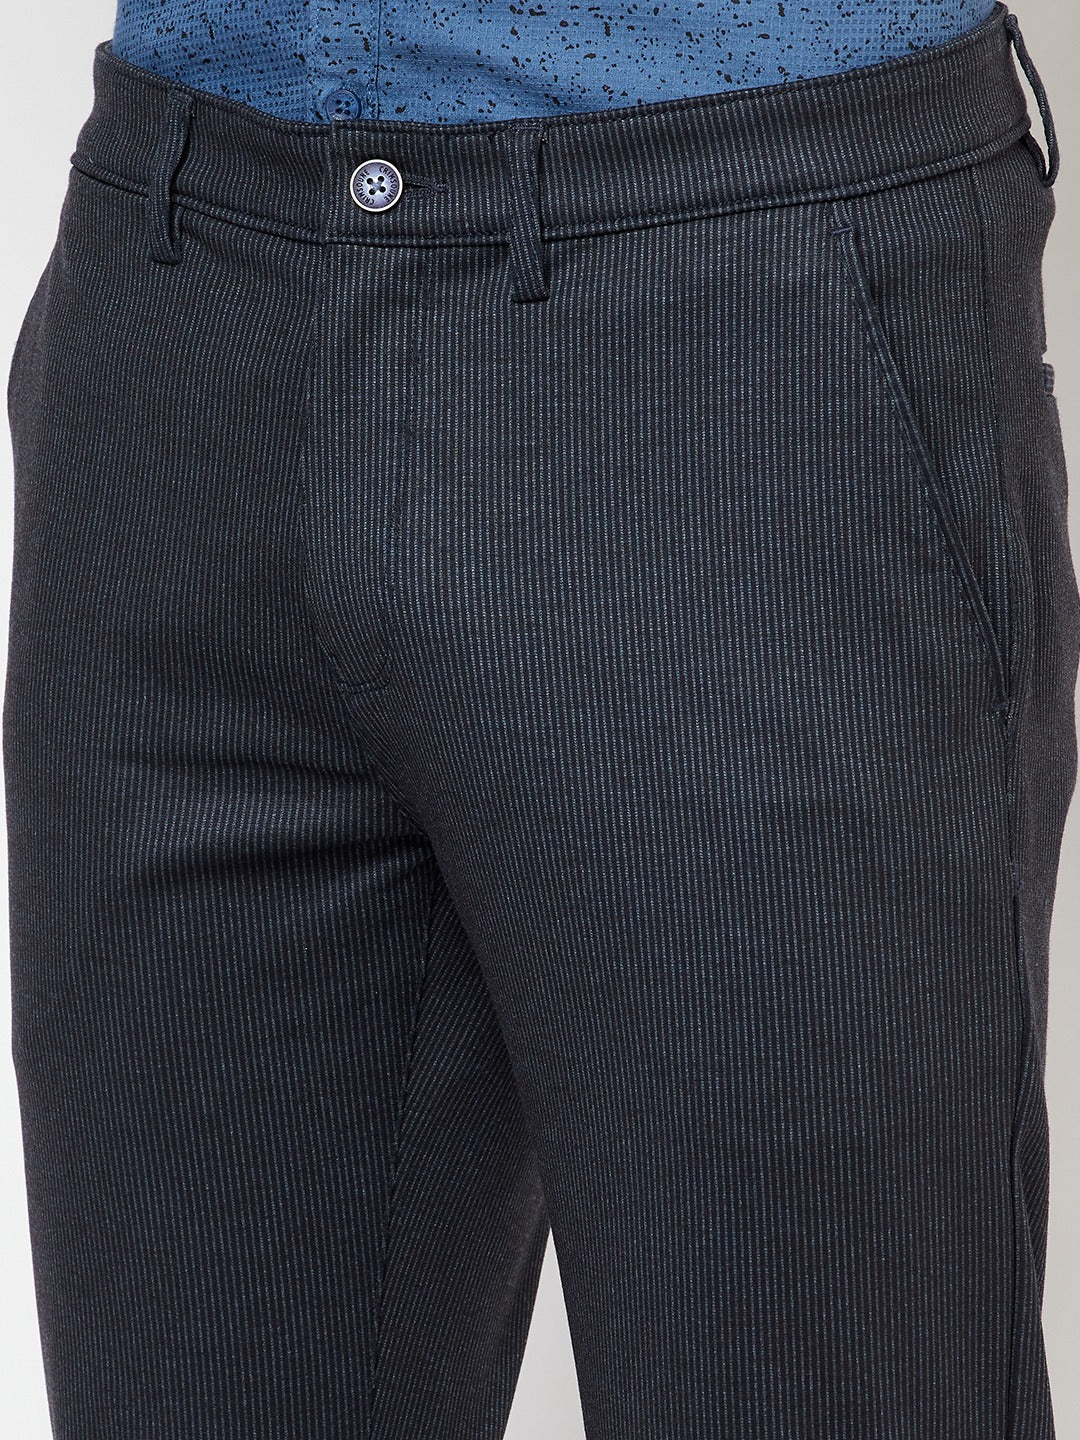 Navy Blue Striped Trousers - Men Trousers